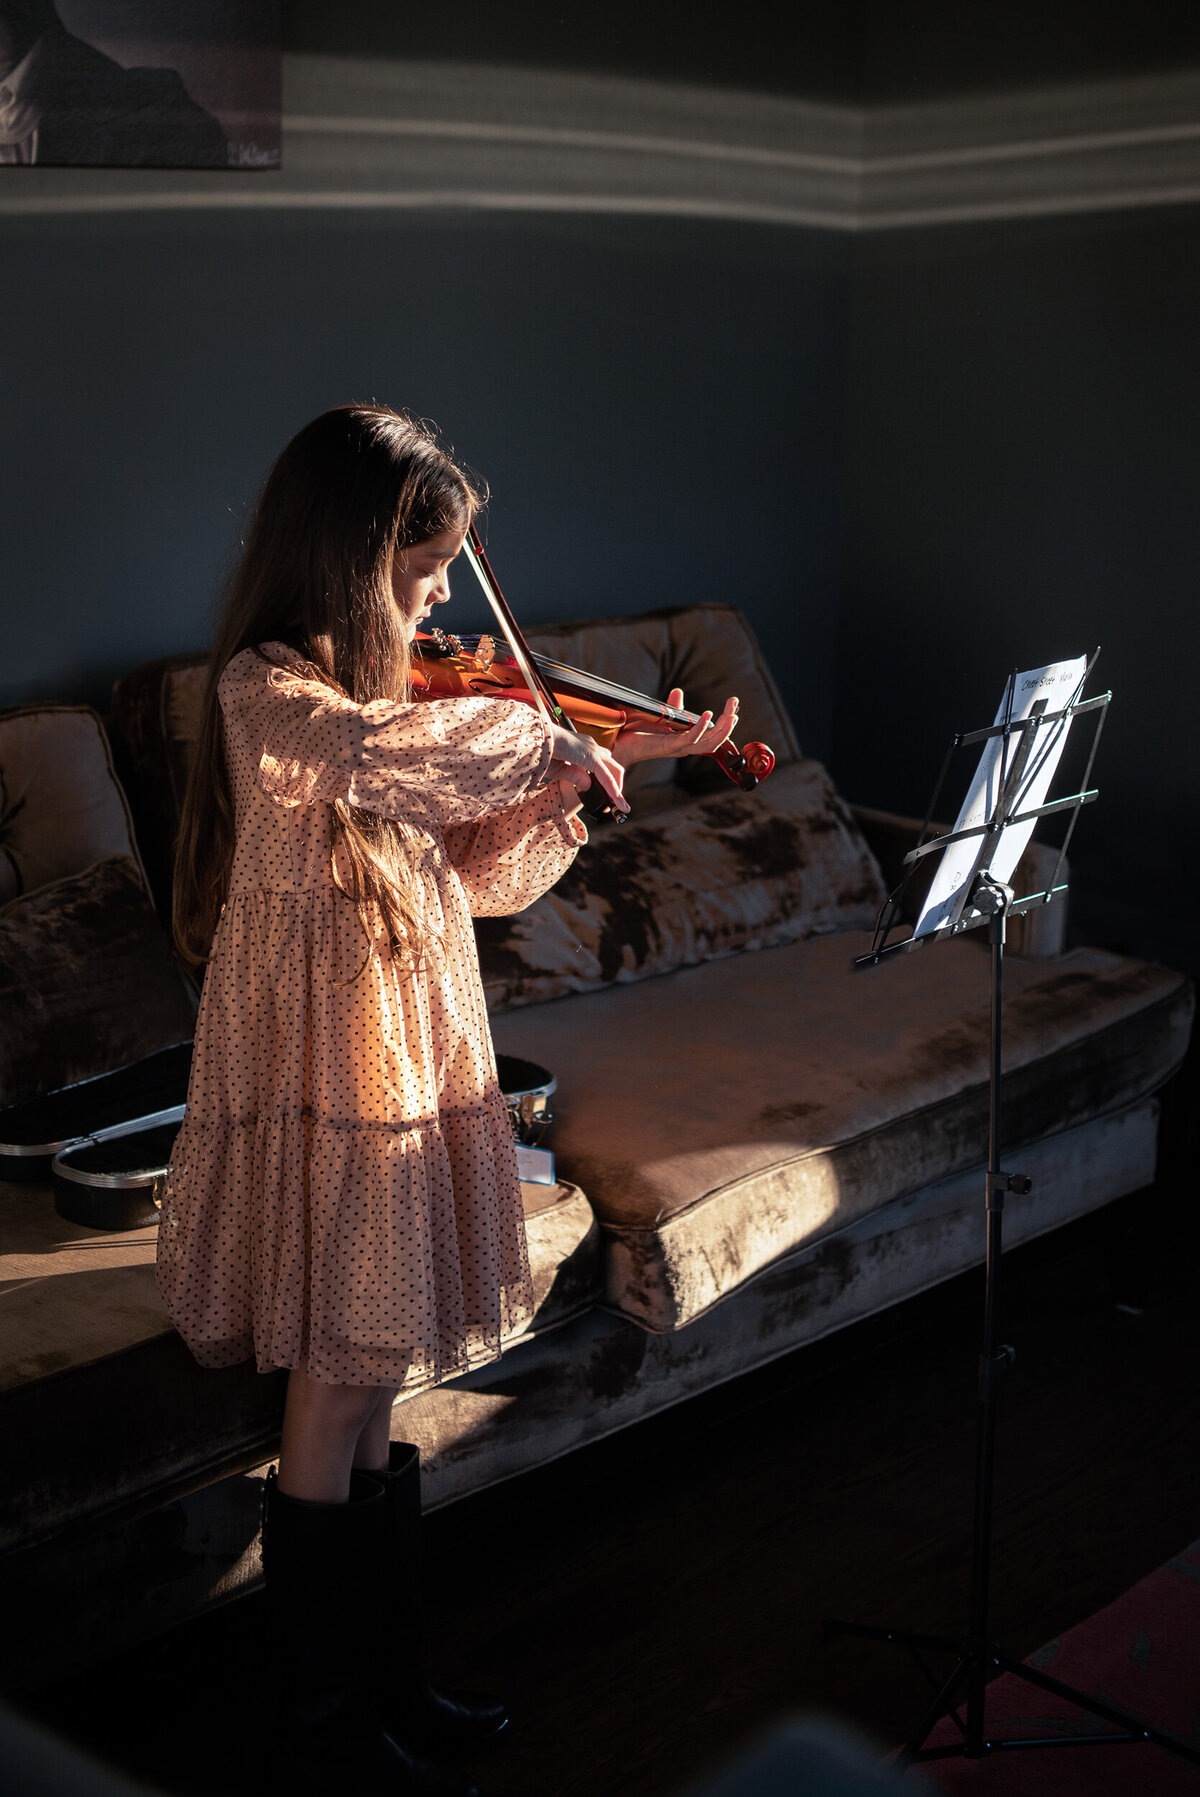 Hoboken Children Lifestyle Photography Kim Lorraine Photography, family pictures, real life pictures, artistic pictures, daughter, music, violin, concert